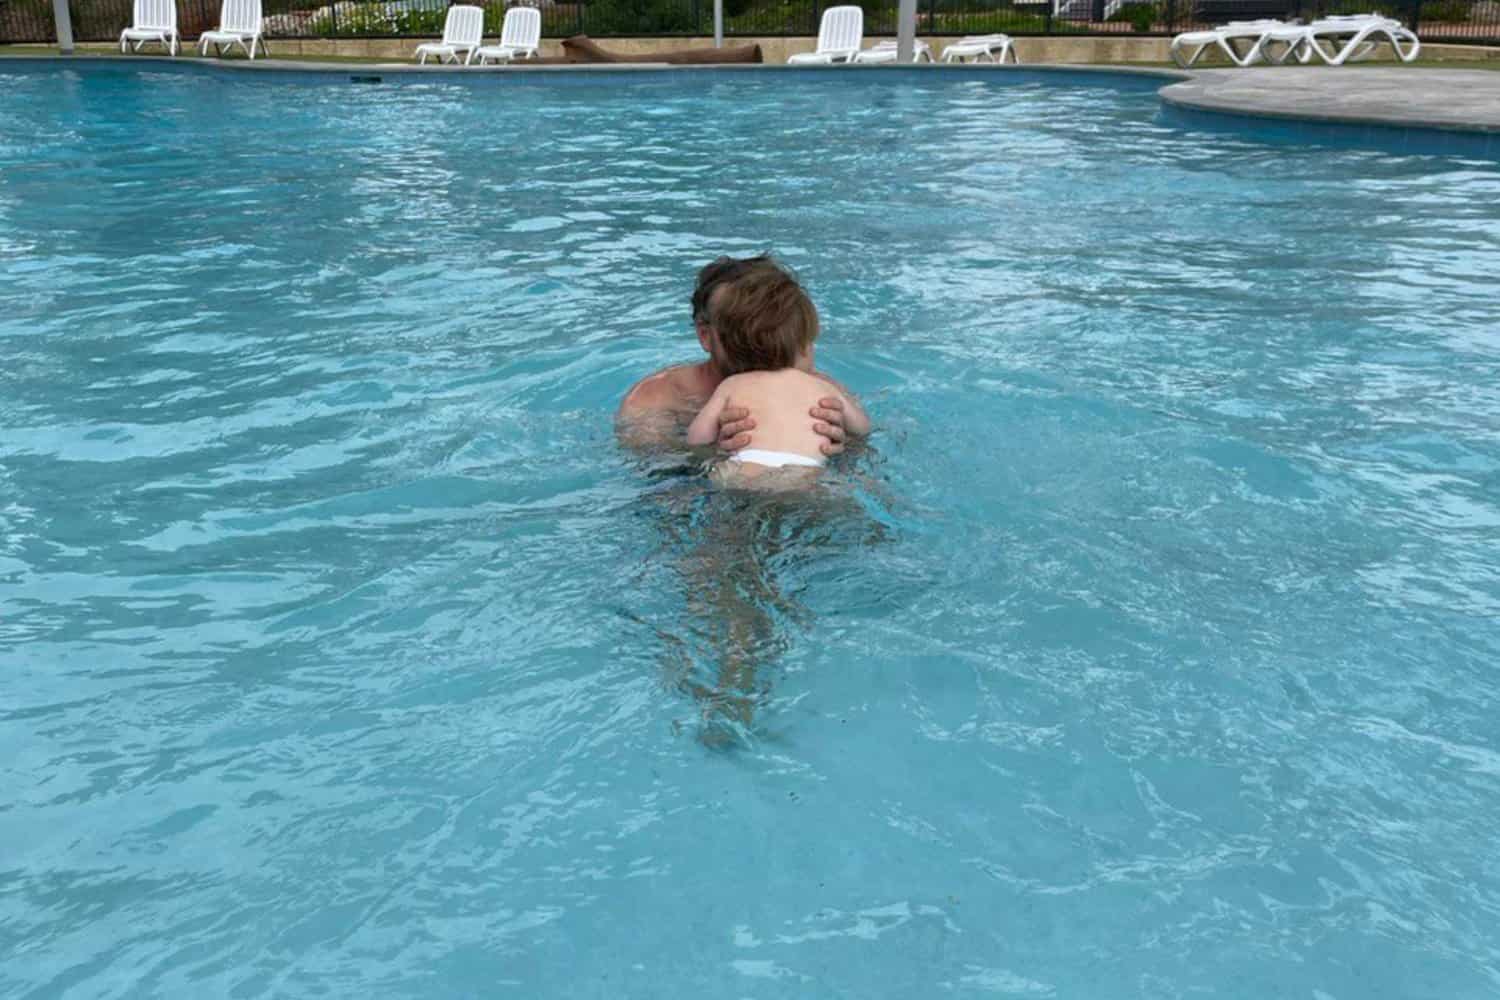 A person enjoying a relaxing swim in a tranquil pool at the RAC Resort in Cervantes, captured from behind, with the individual's back partially submerged in the clear blue water.